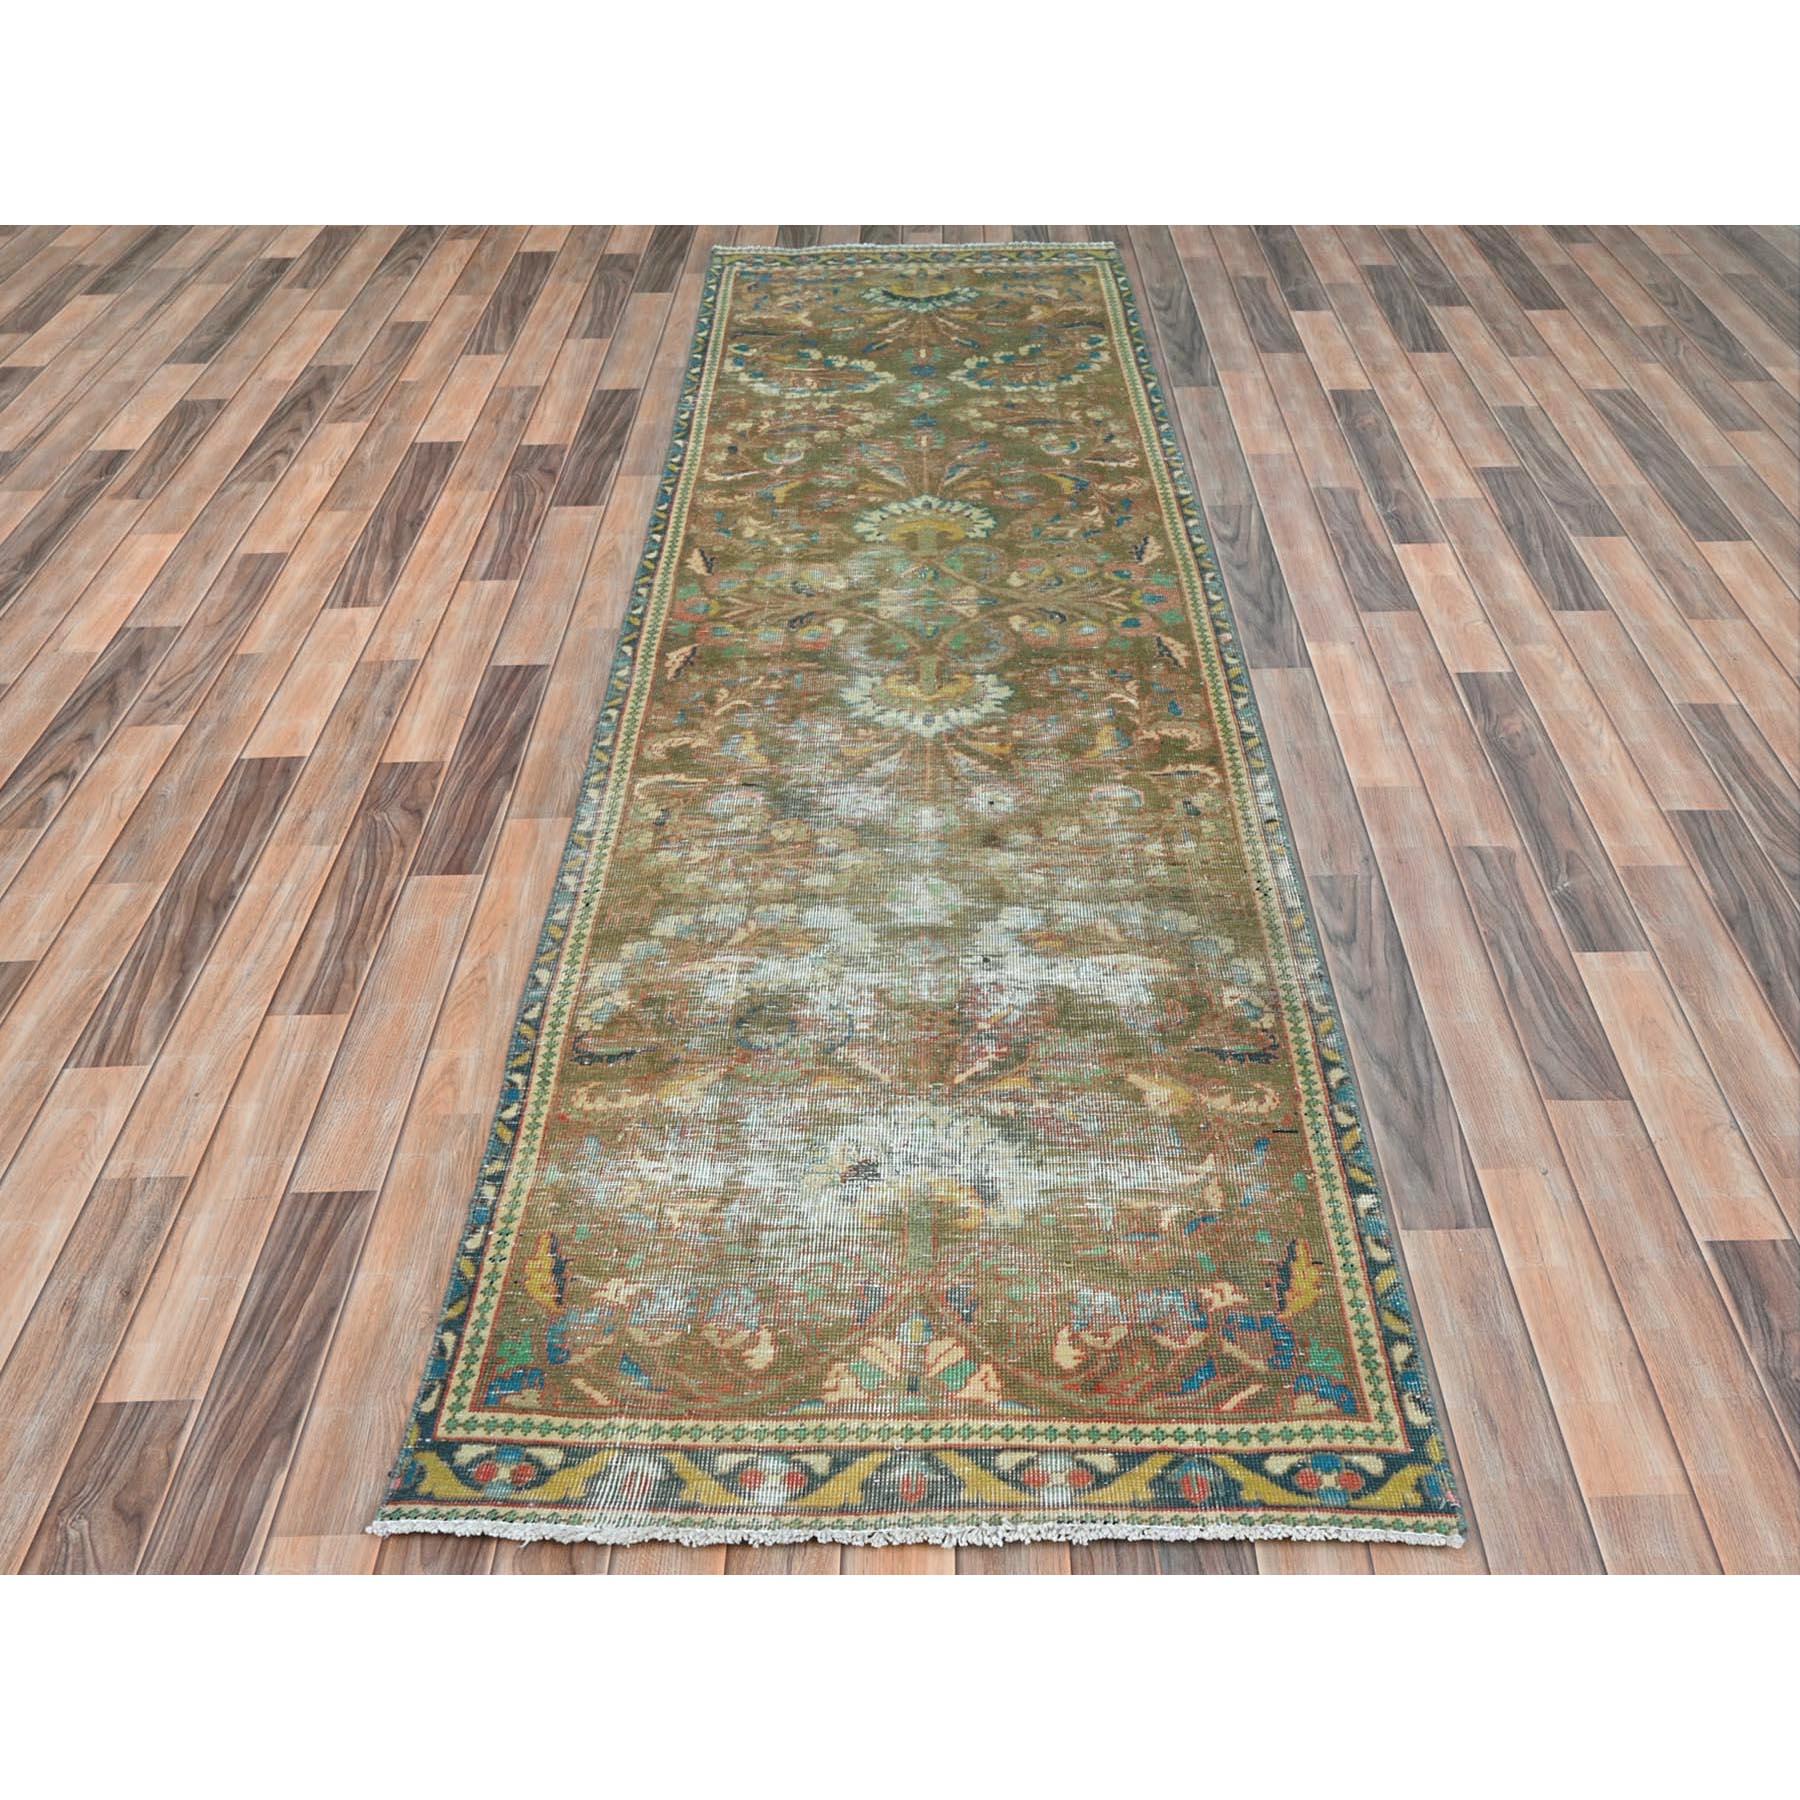 This fabulous hand-knotted carpet has been created and designed for extra strength and durability. This rug has been handcrafted for weeks in the traditional method that is used to make
Exact Rug Size in Feet and Inches : 3'0